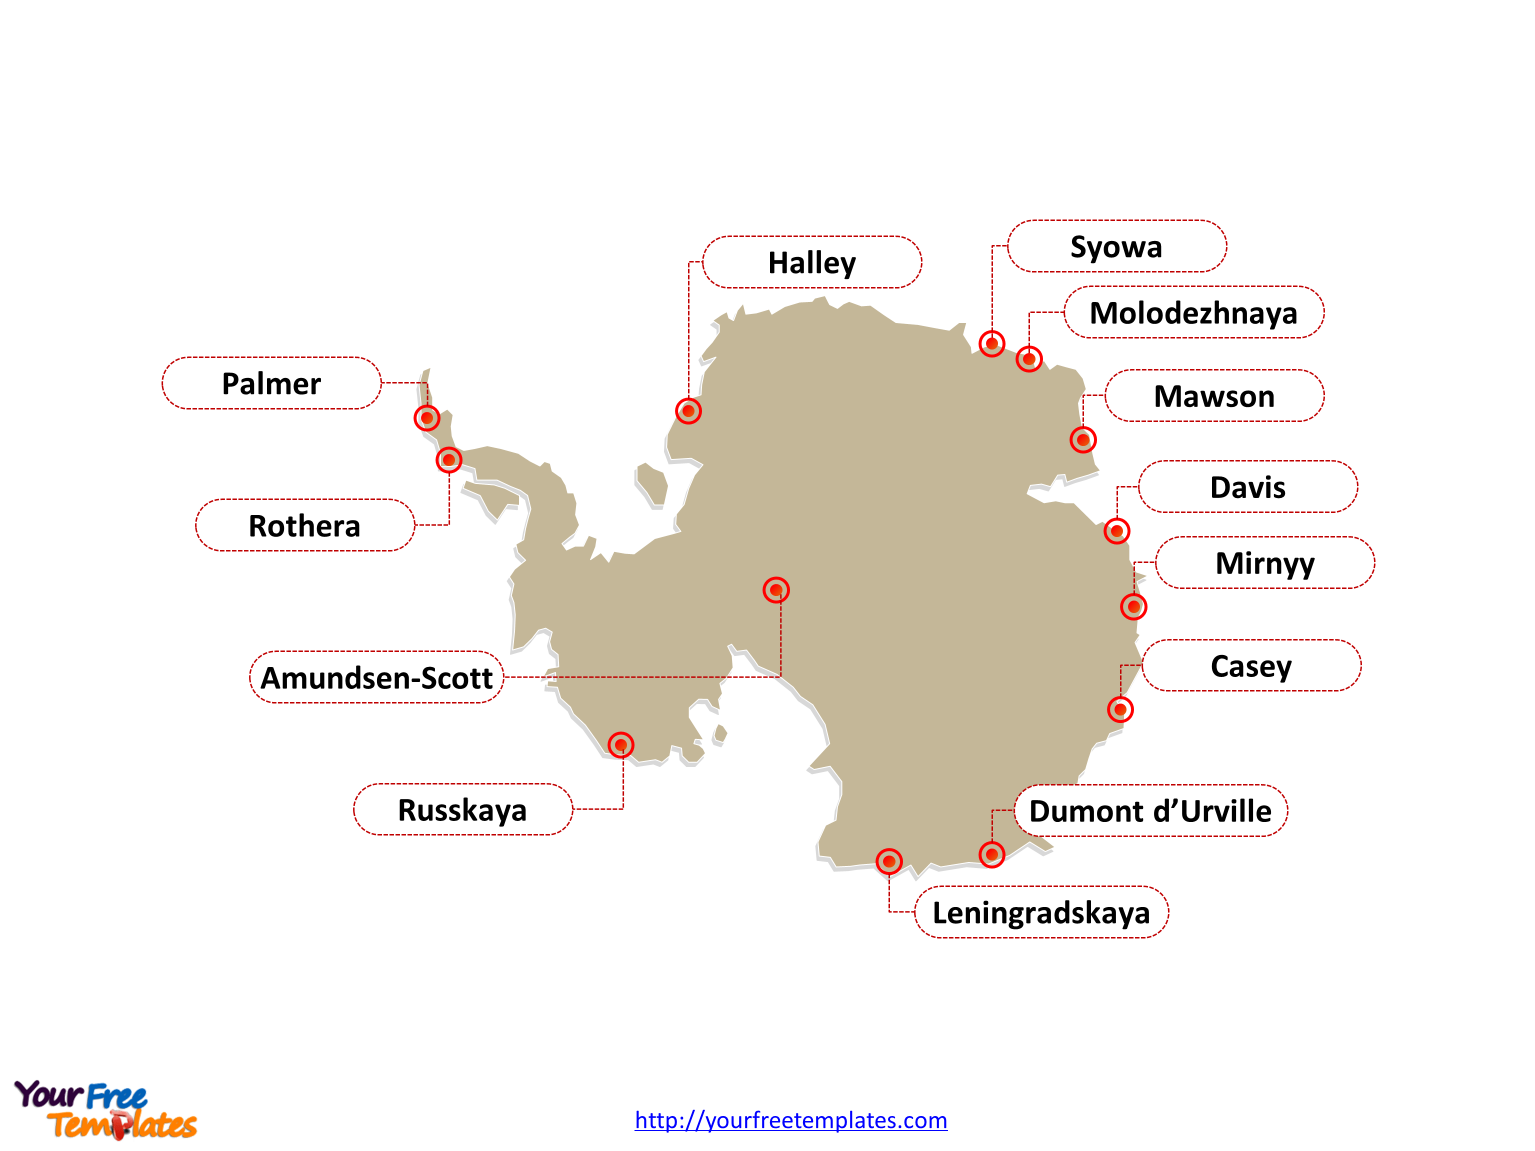 Antarctica map labeled with major stations